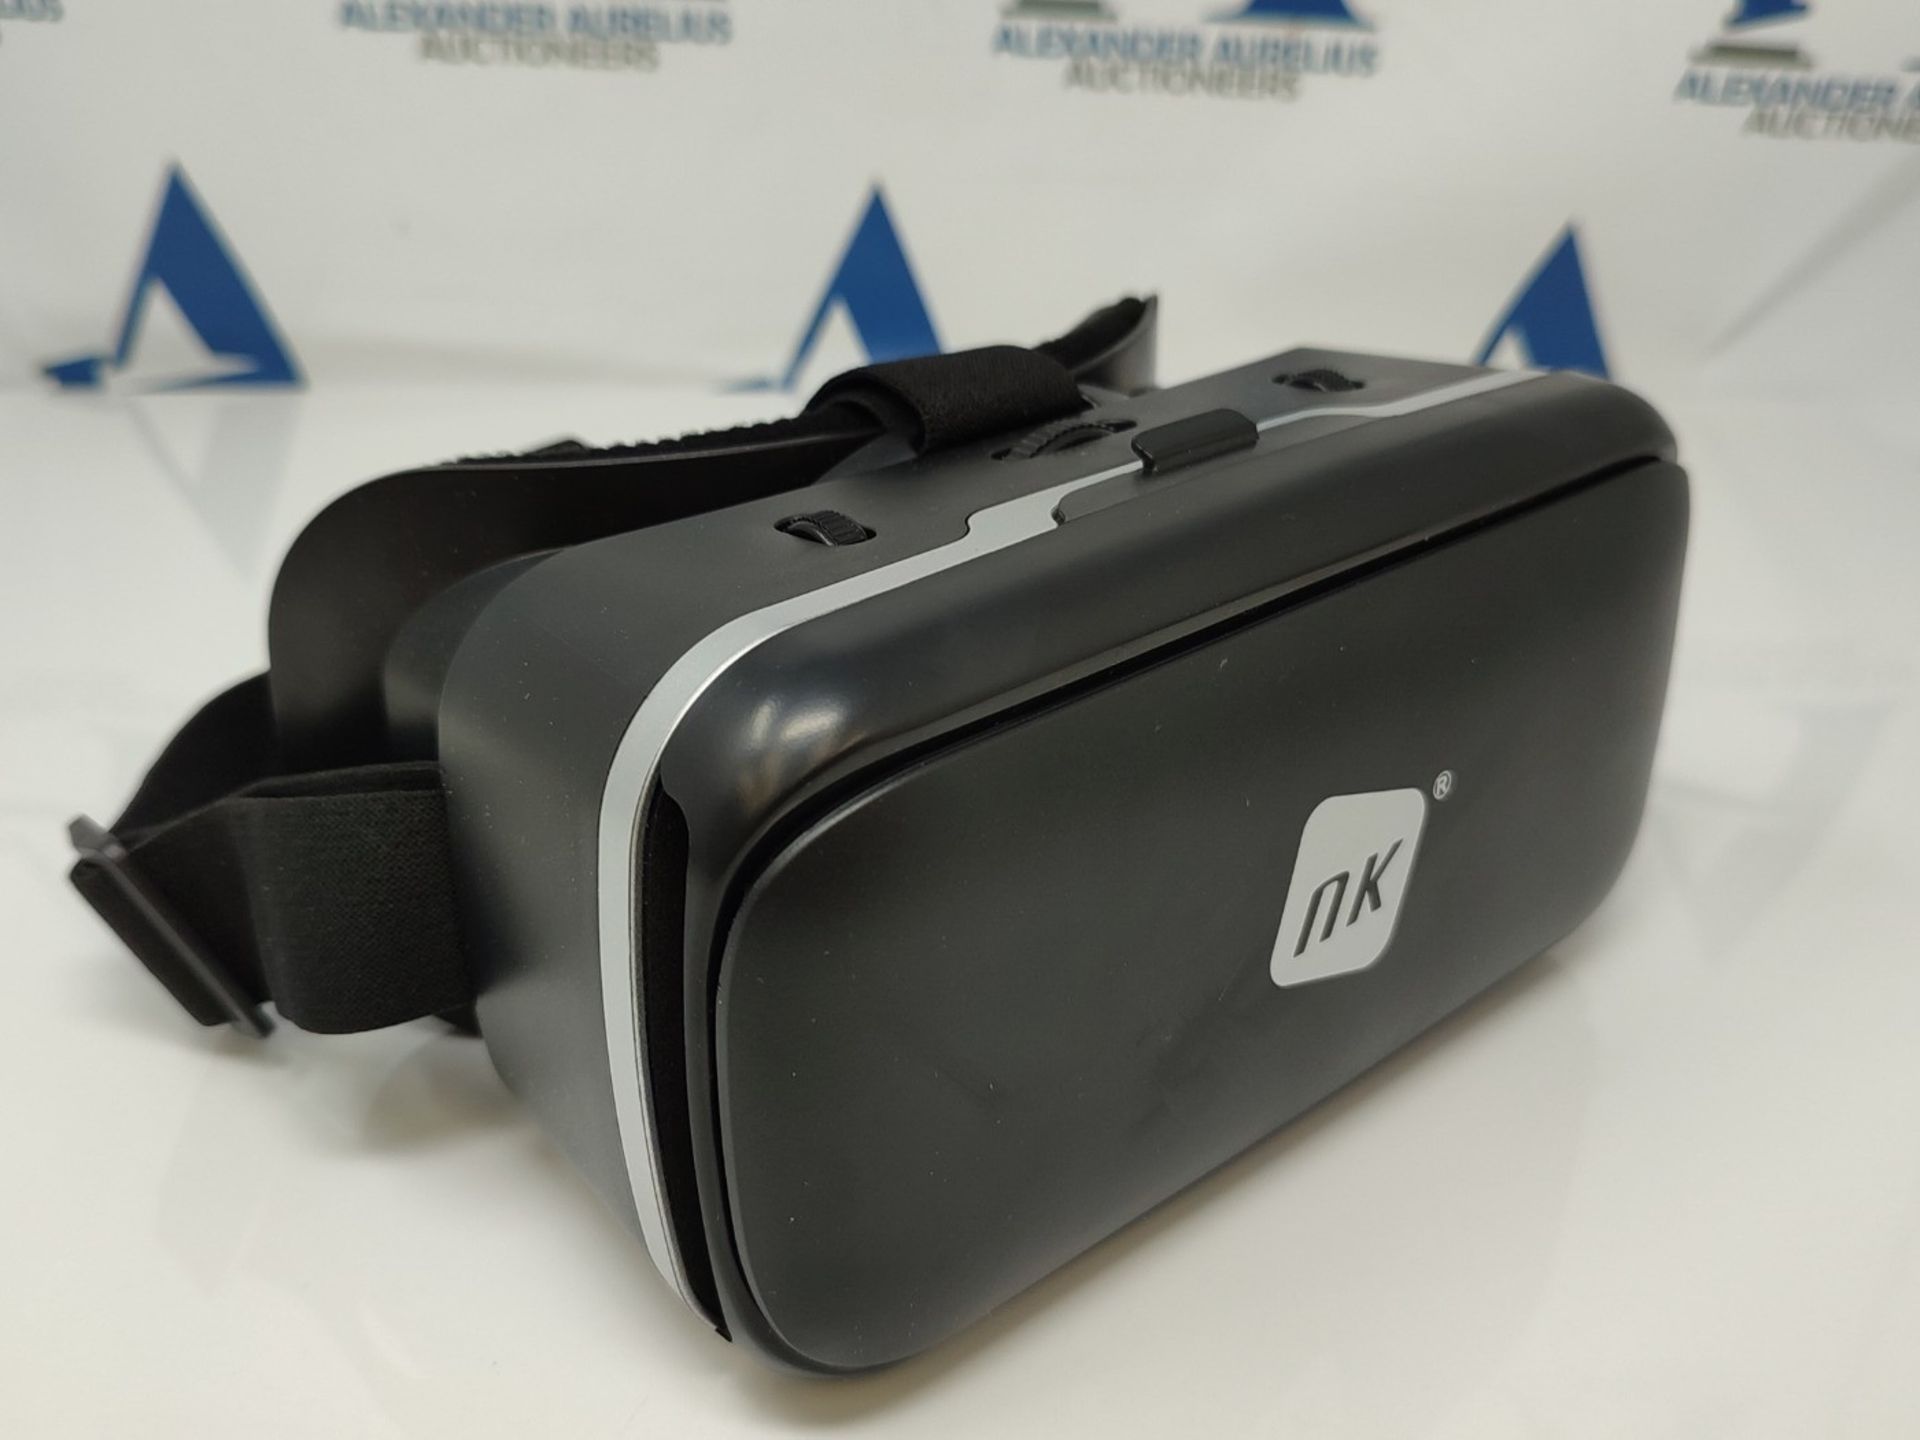 NK 3D VR Glasses for Smartphones - Smart Virtual Reality Headsets for Smartphones betw - Image 2 of 3